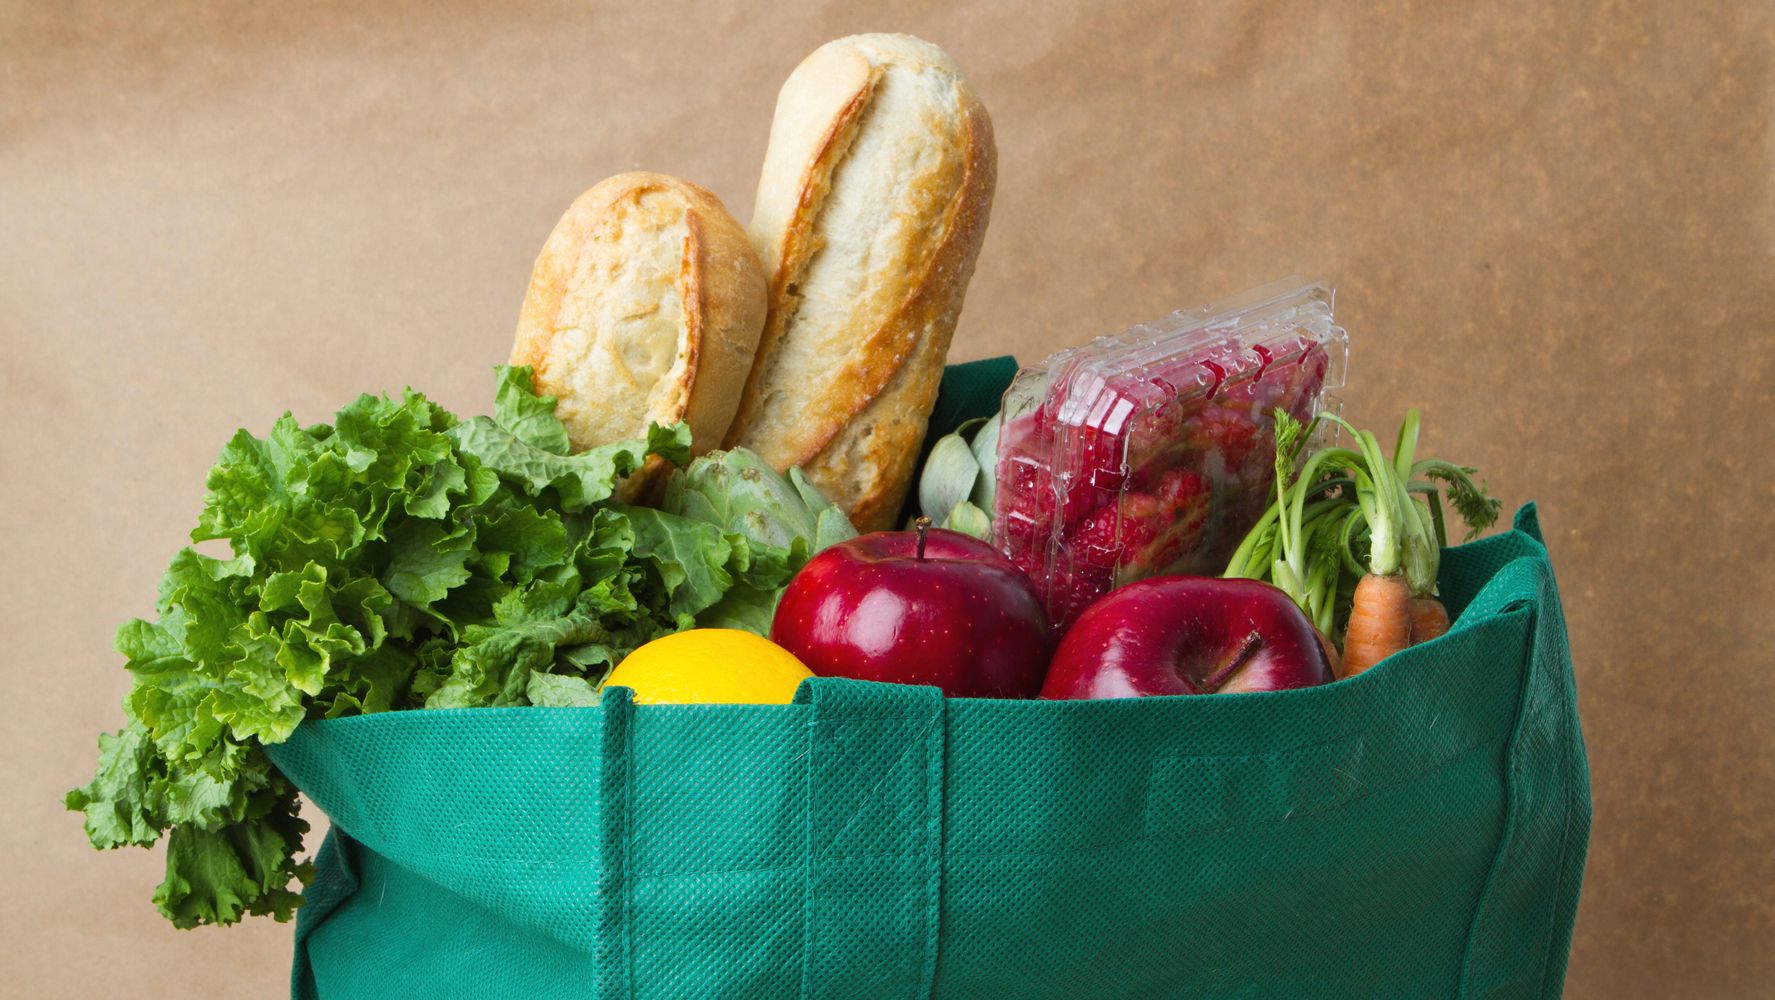 Use separate grocery bags for meat to avoid food poisoning •